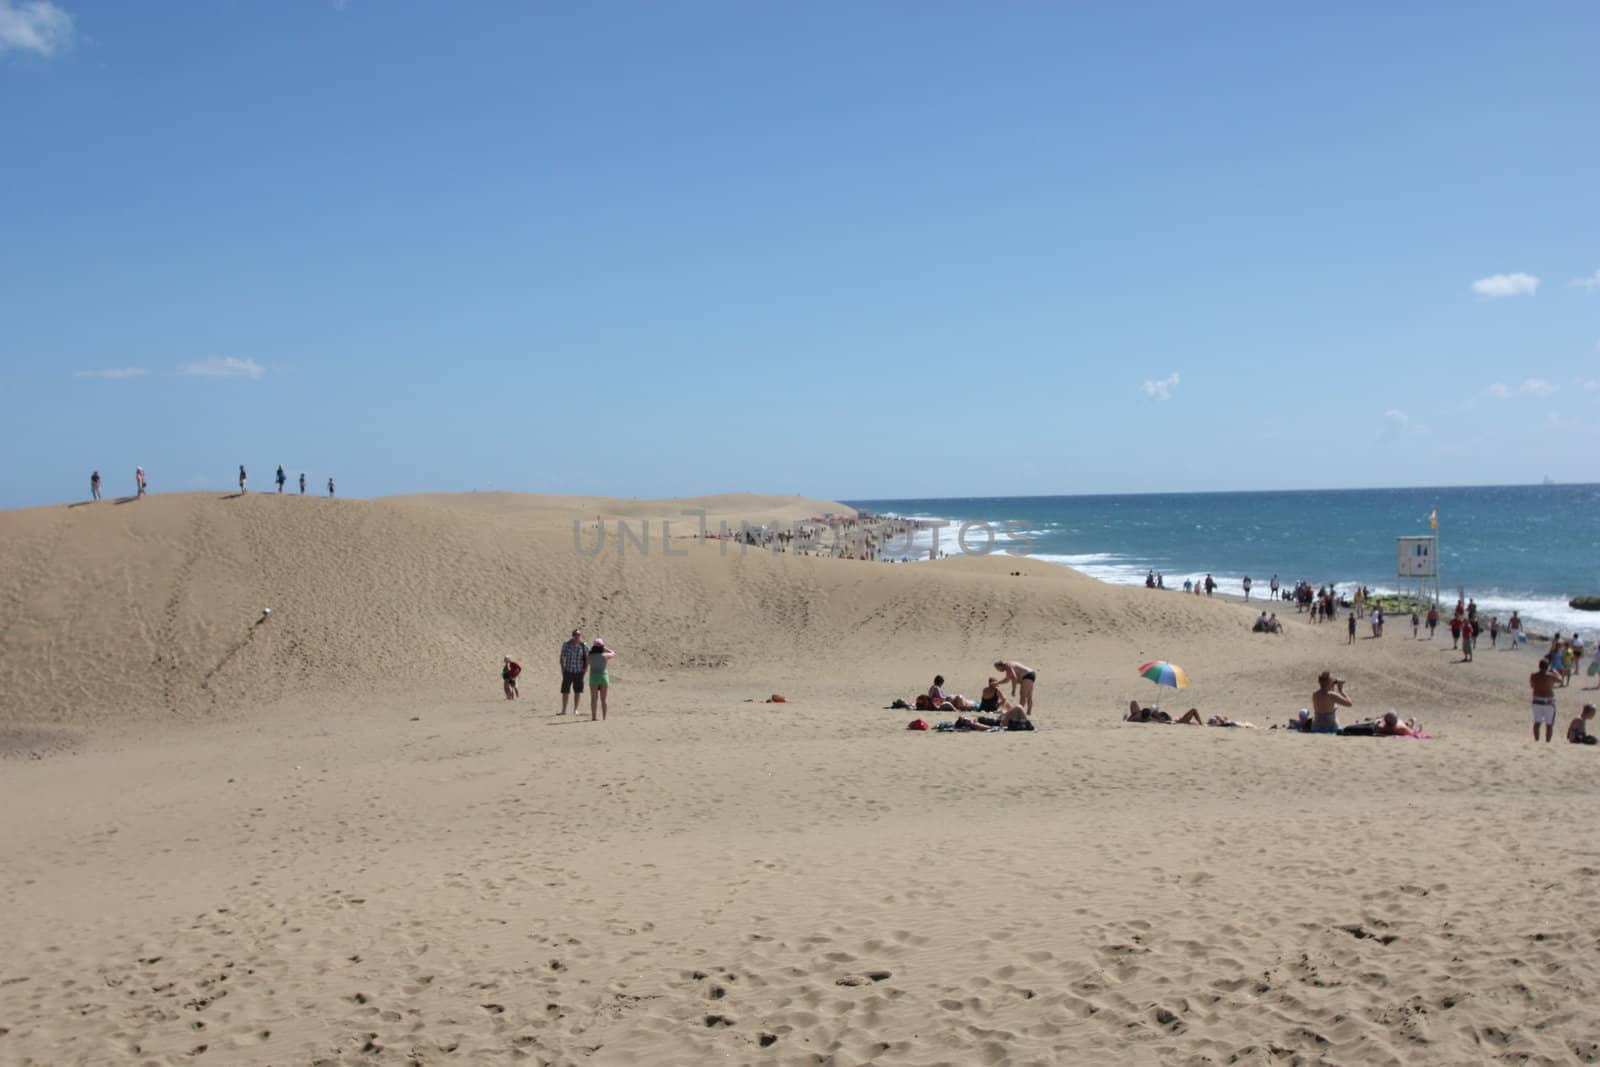 The coastline by the sand dunes in Maspalomas